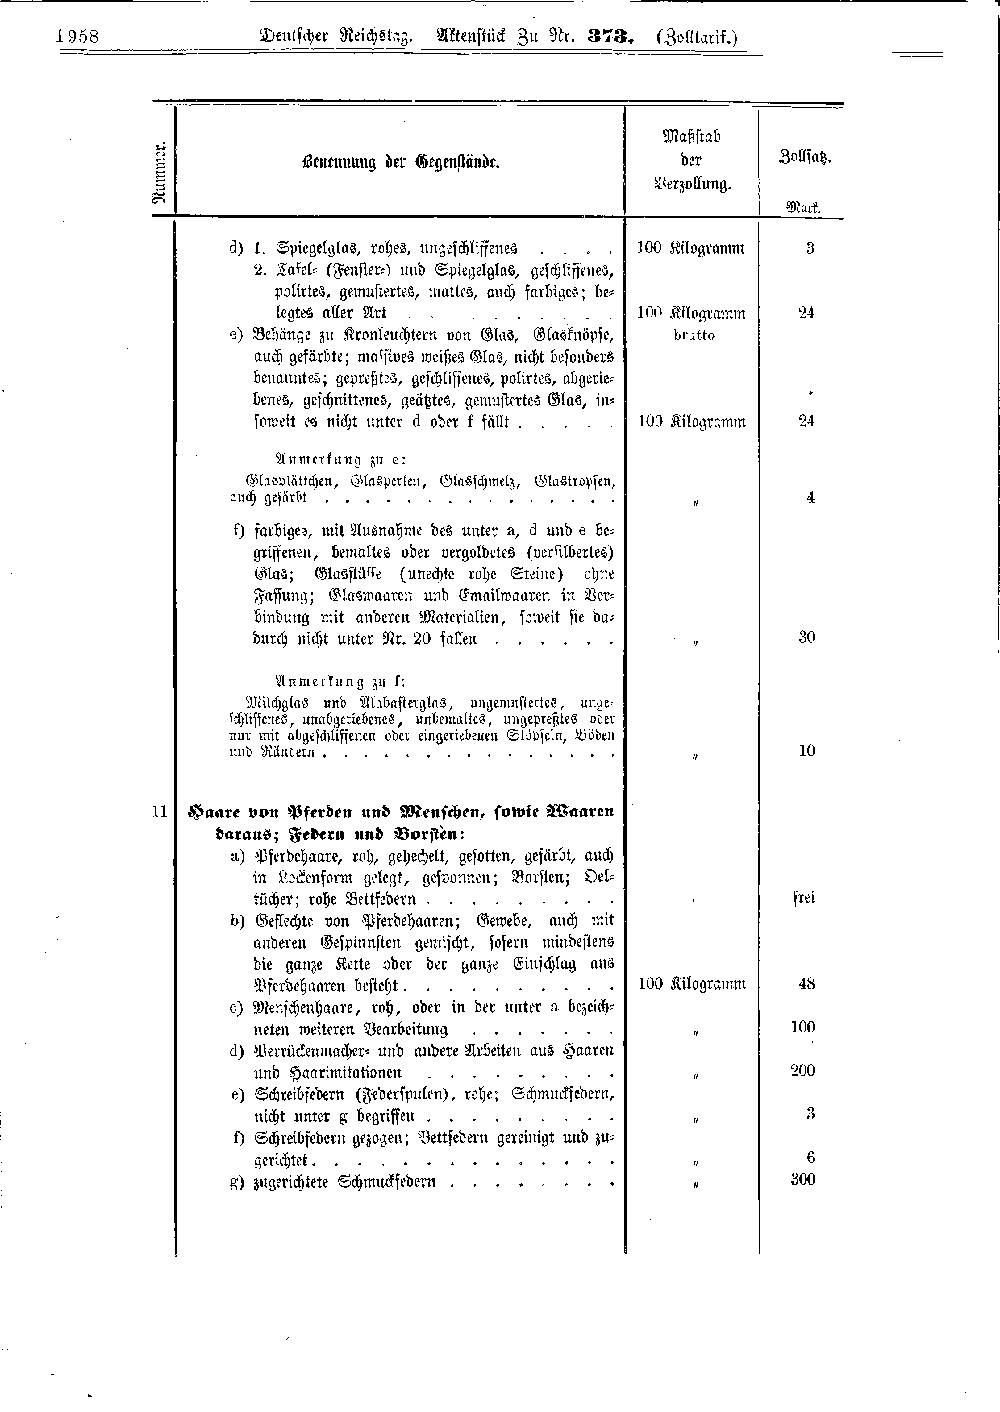 Scan of page 1958